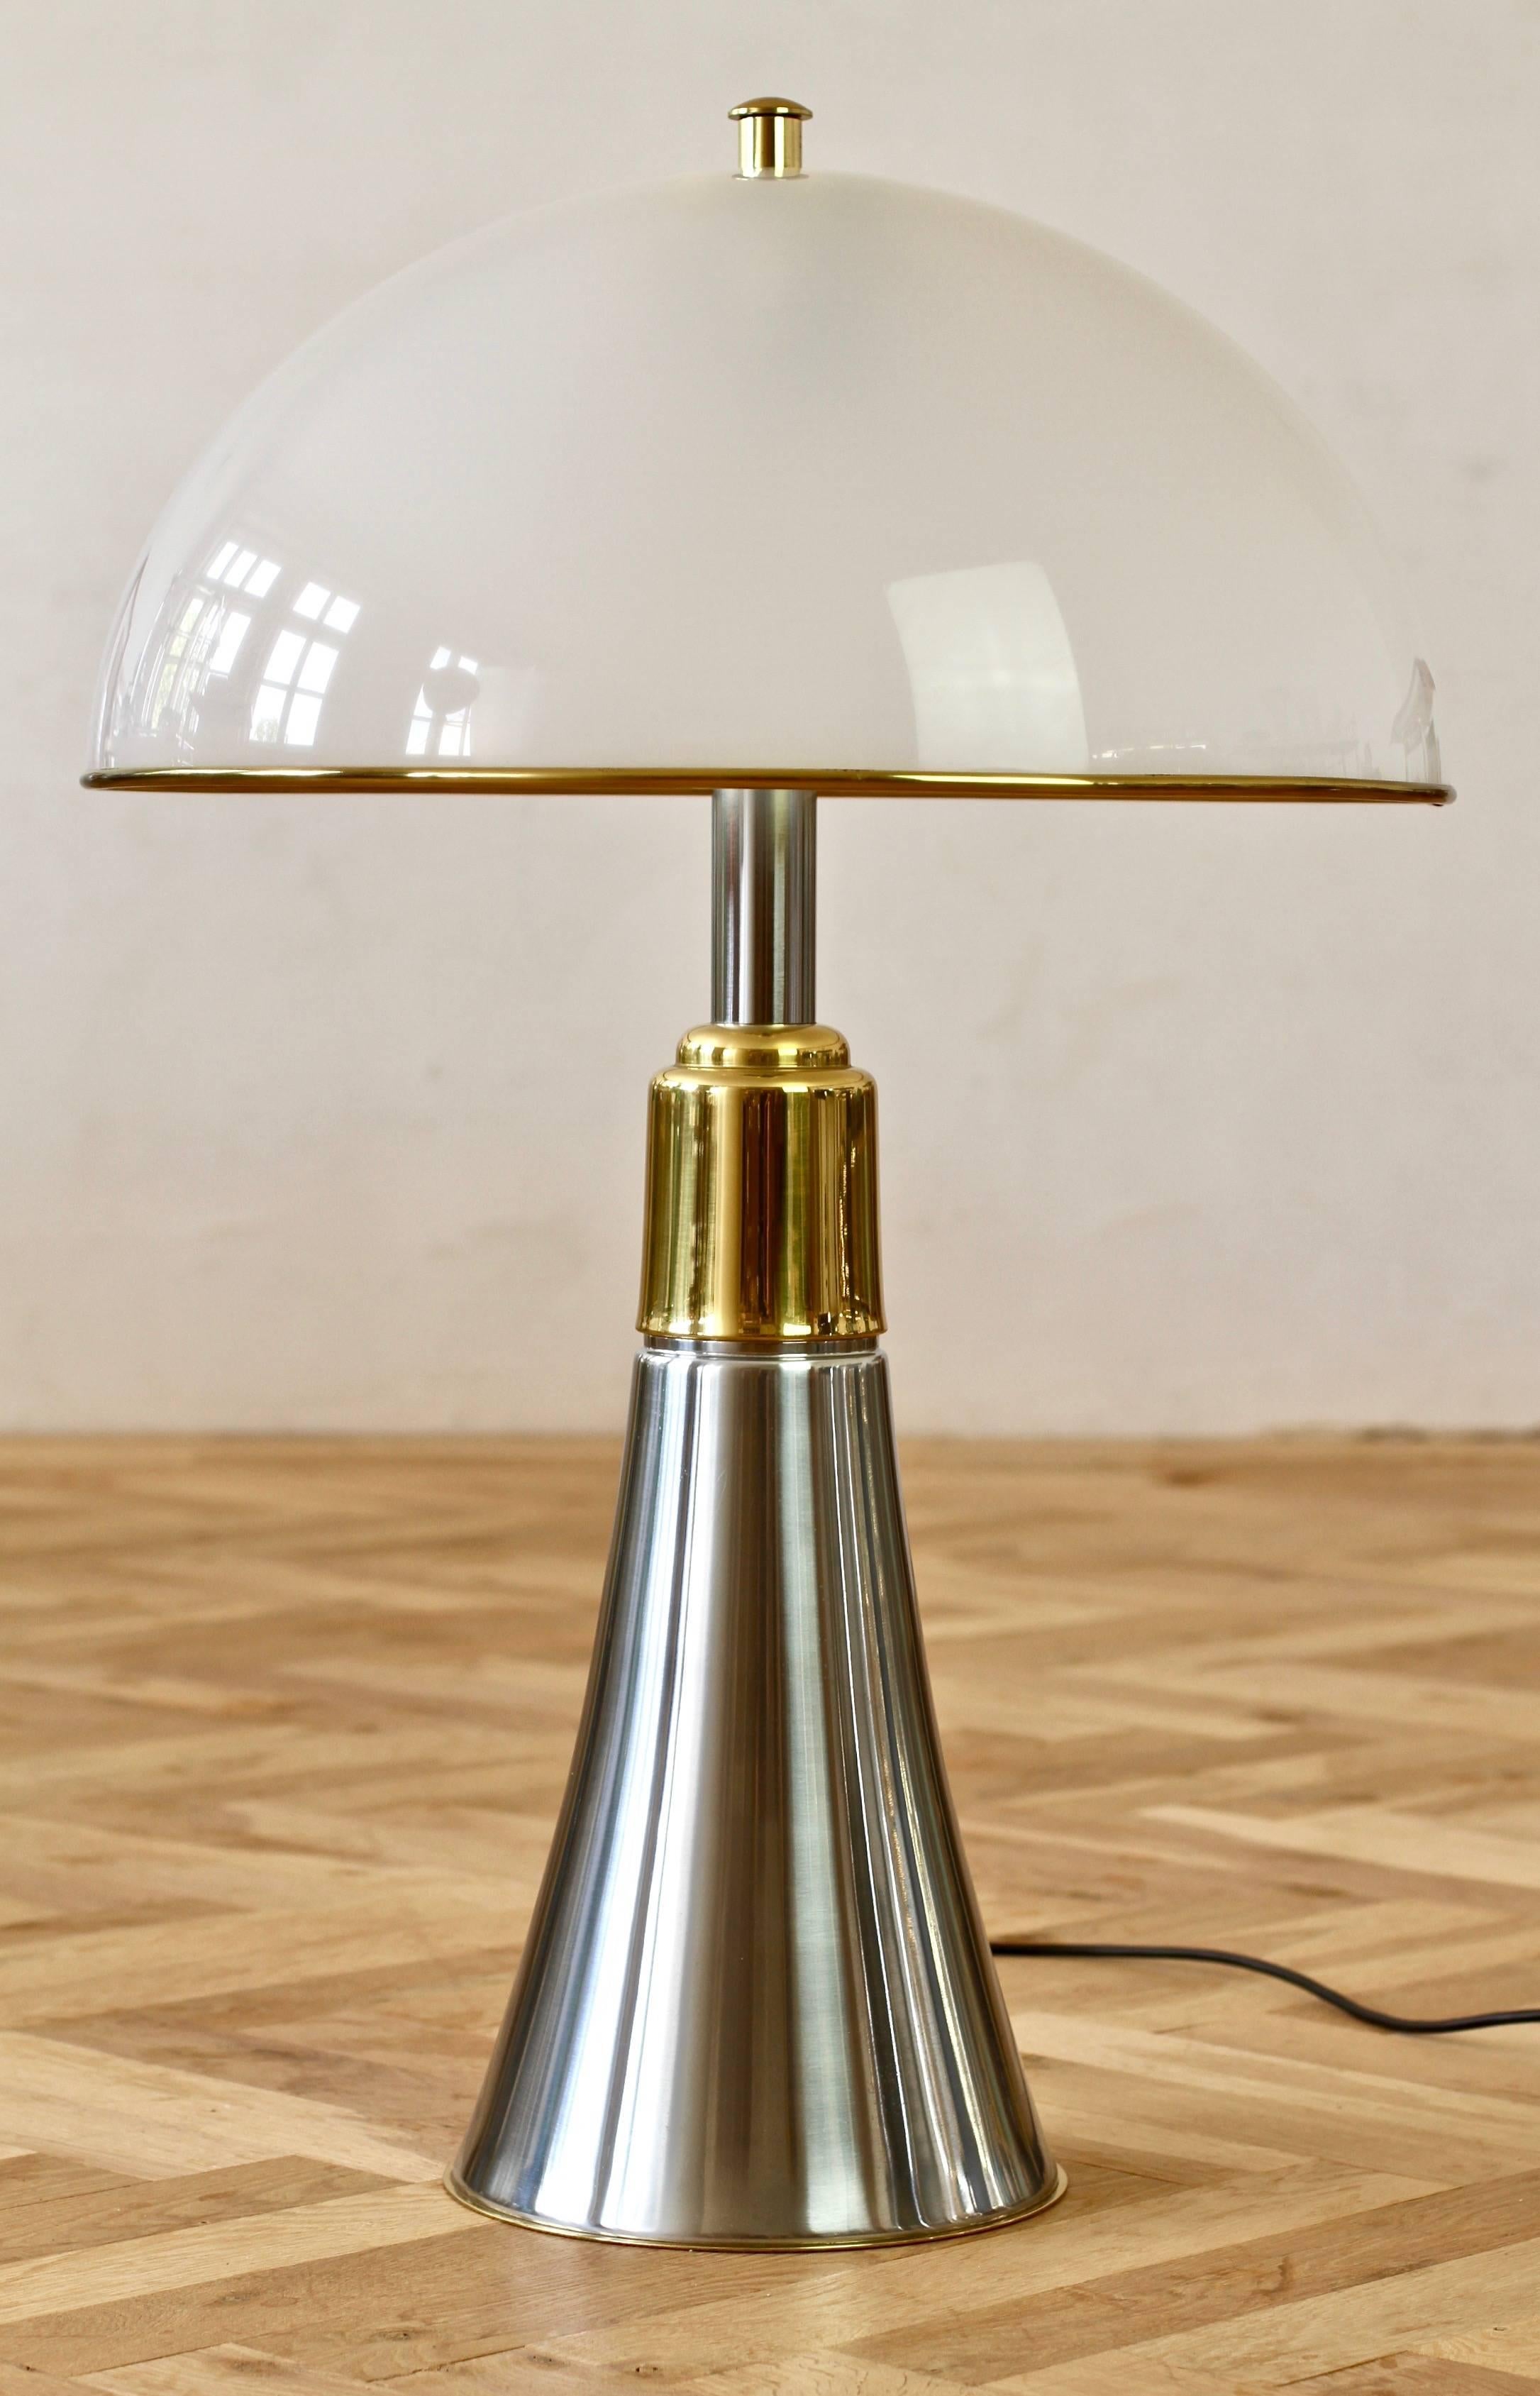 Mid-Century Modern Gae Aulenti style oversized table or floor lamp made, circa 1970s in Italy or Belgium. Featuring brushed aluminium and polished brass, this piece lends itself to any modern home decor as well as the Mid-Century Modern, Hollywood